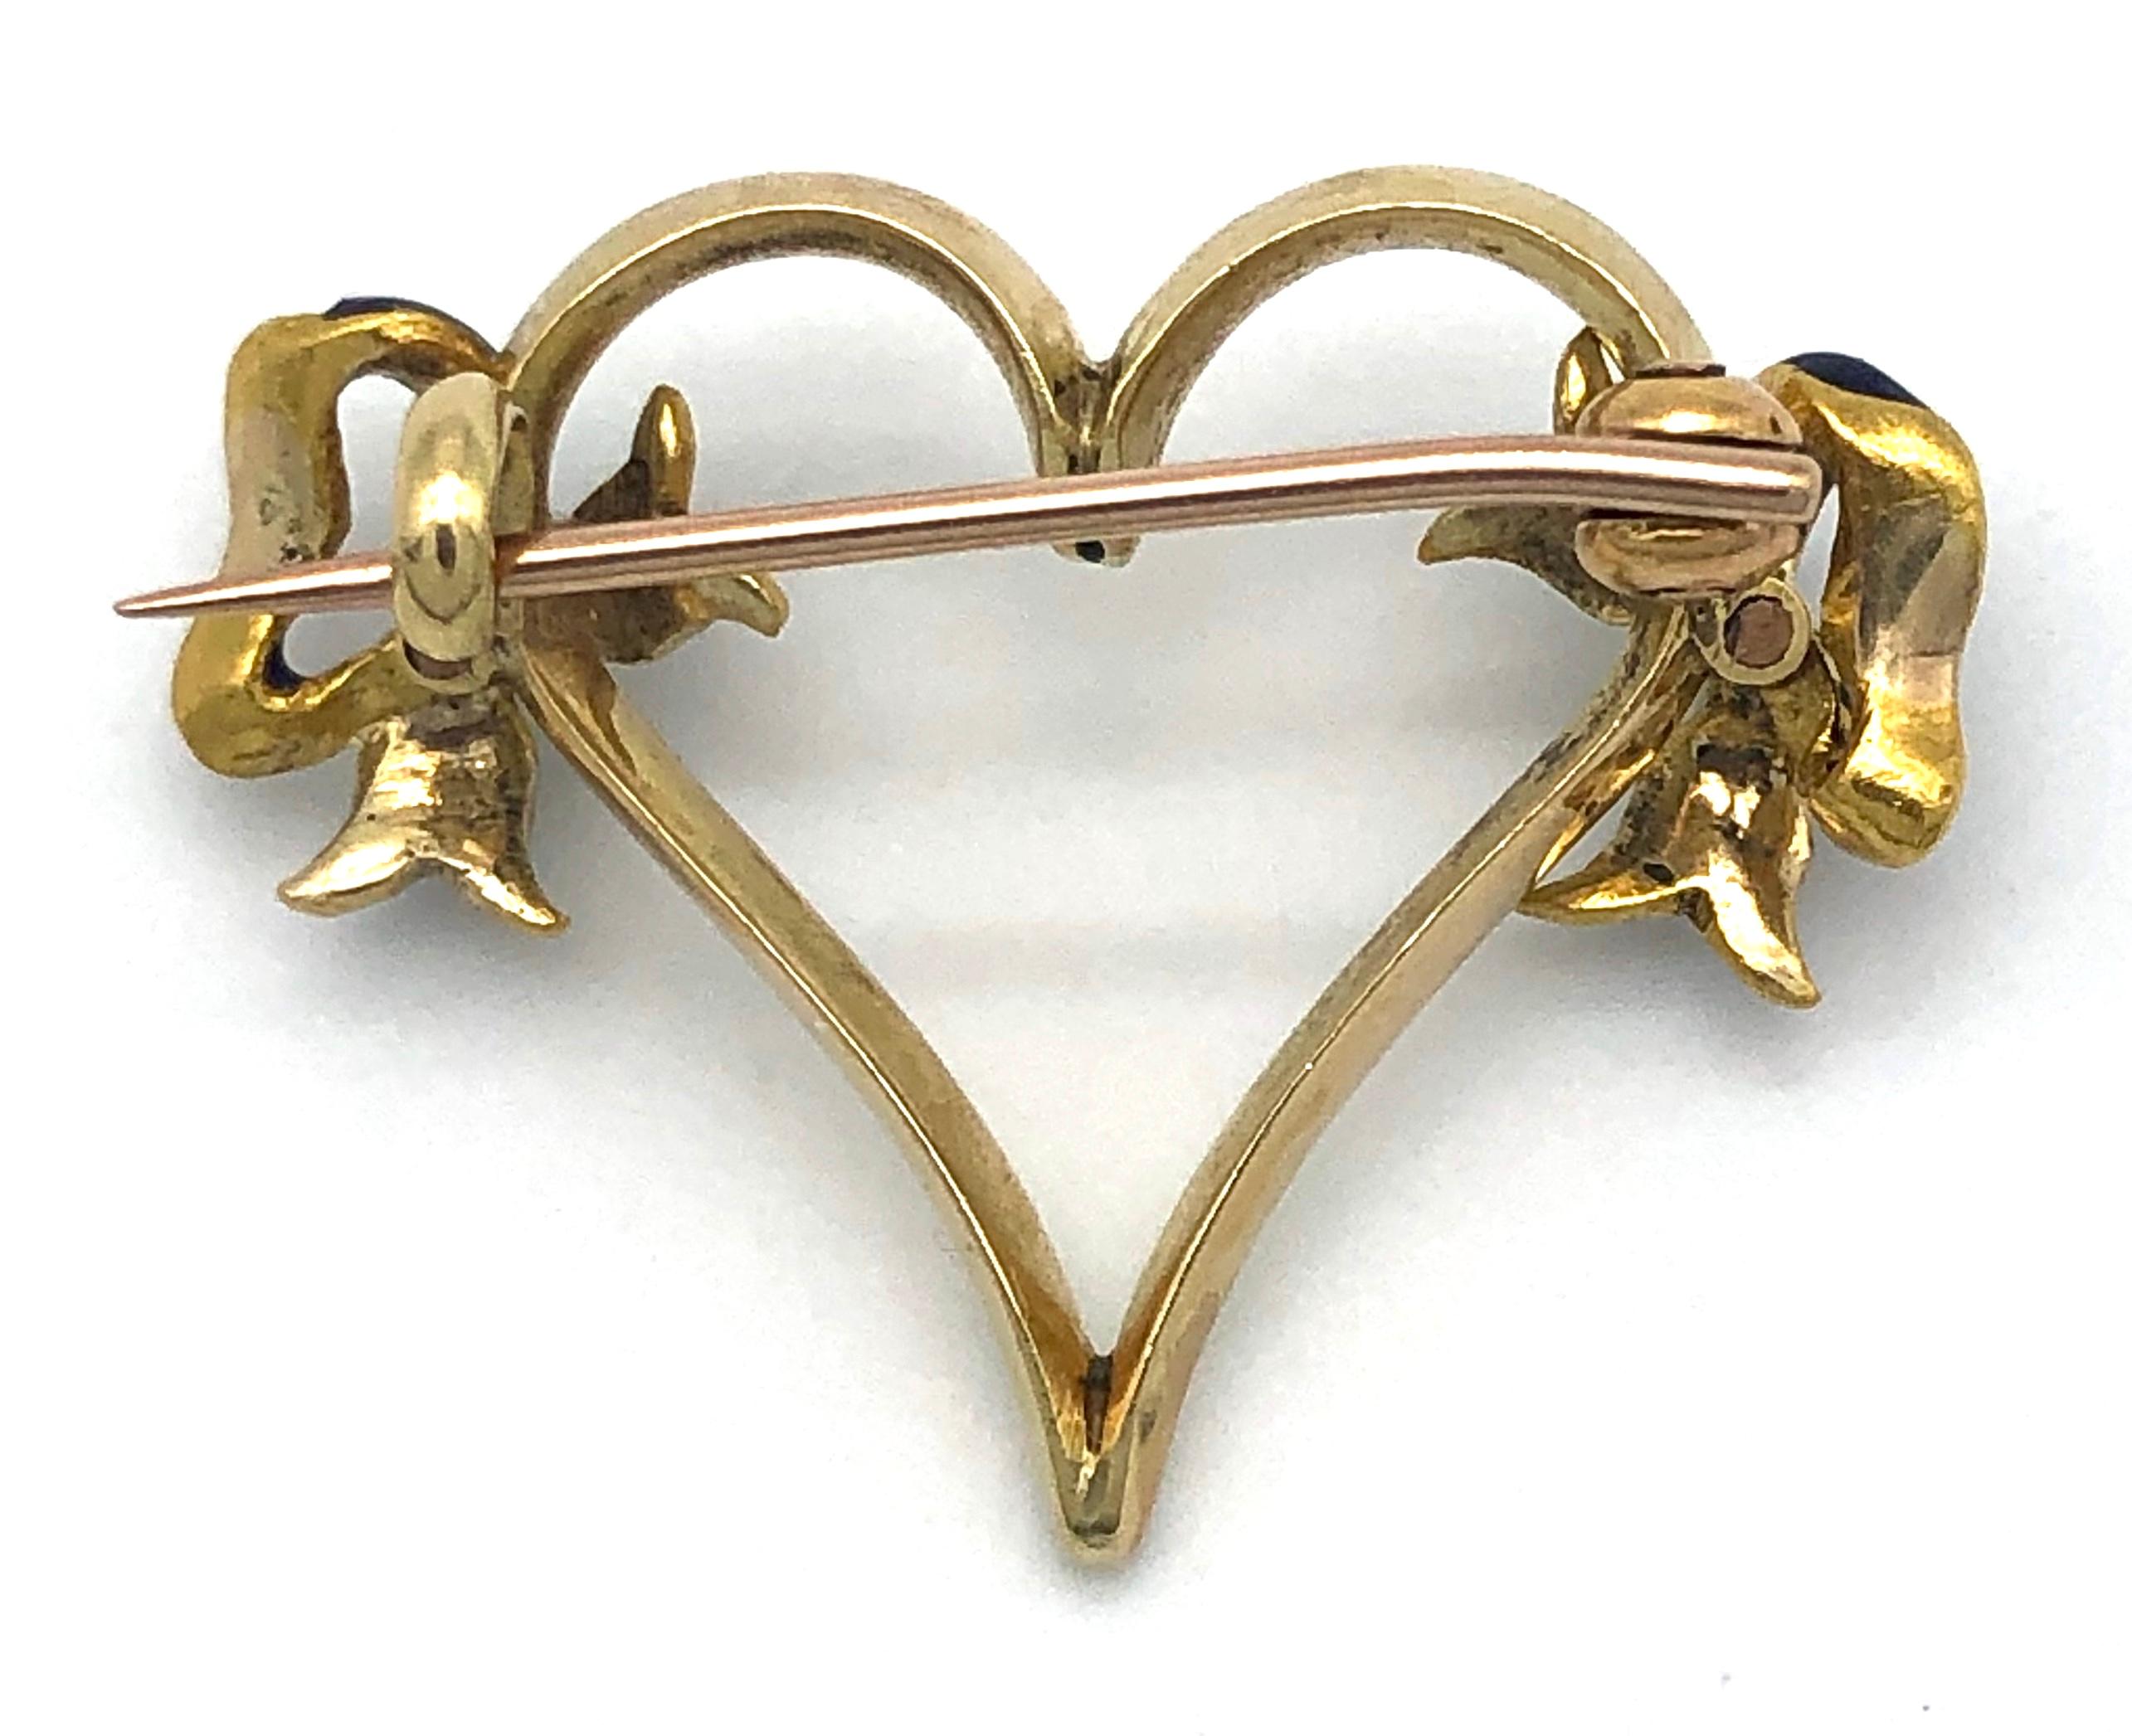 Charming Edwardian 14k gold brooch in the shape of a cream coloured enamelled heart with blue polka dots. The heart is decorated with two blue enamelled bows set with pearls.